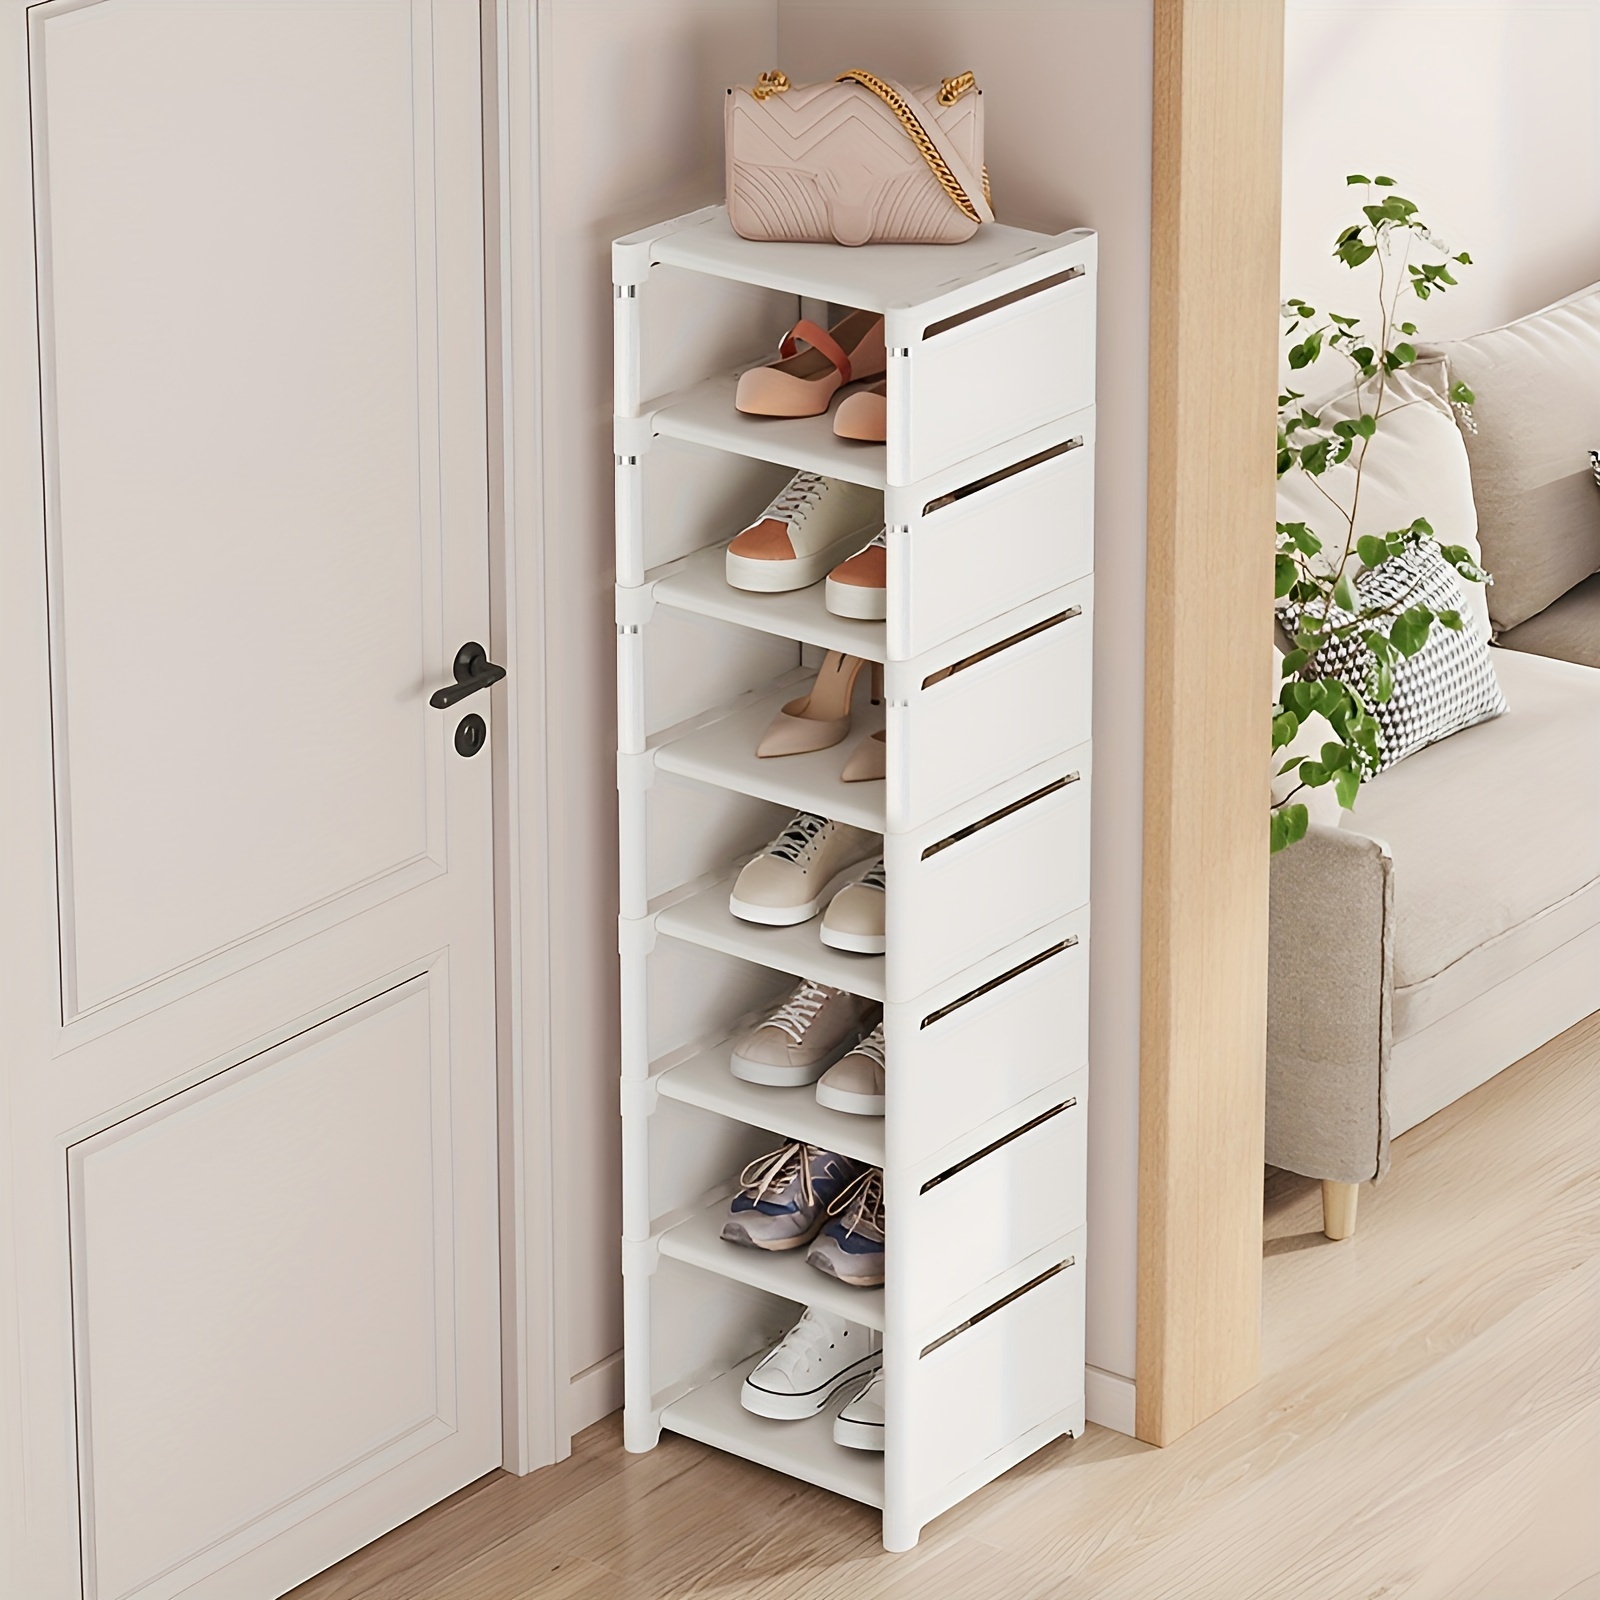 

Lifevilion Space-saving Shoe Rack - 6/8 Layers, Easy Assembly, High Capacity Storage For Entryway, Living Room, Dorm